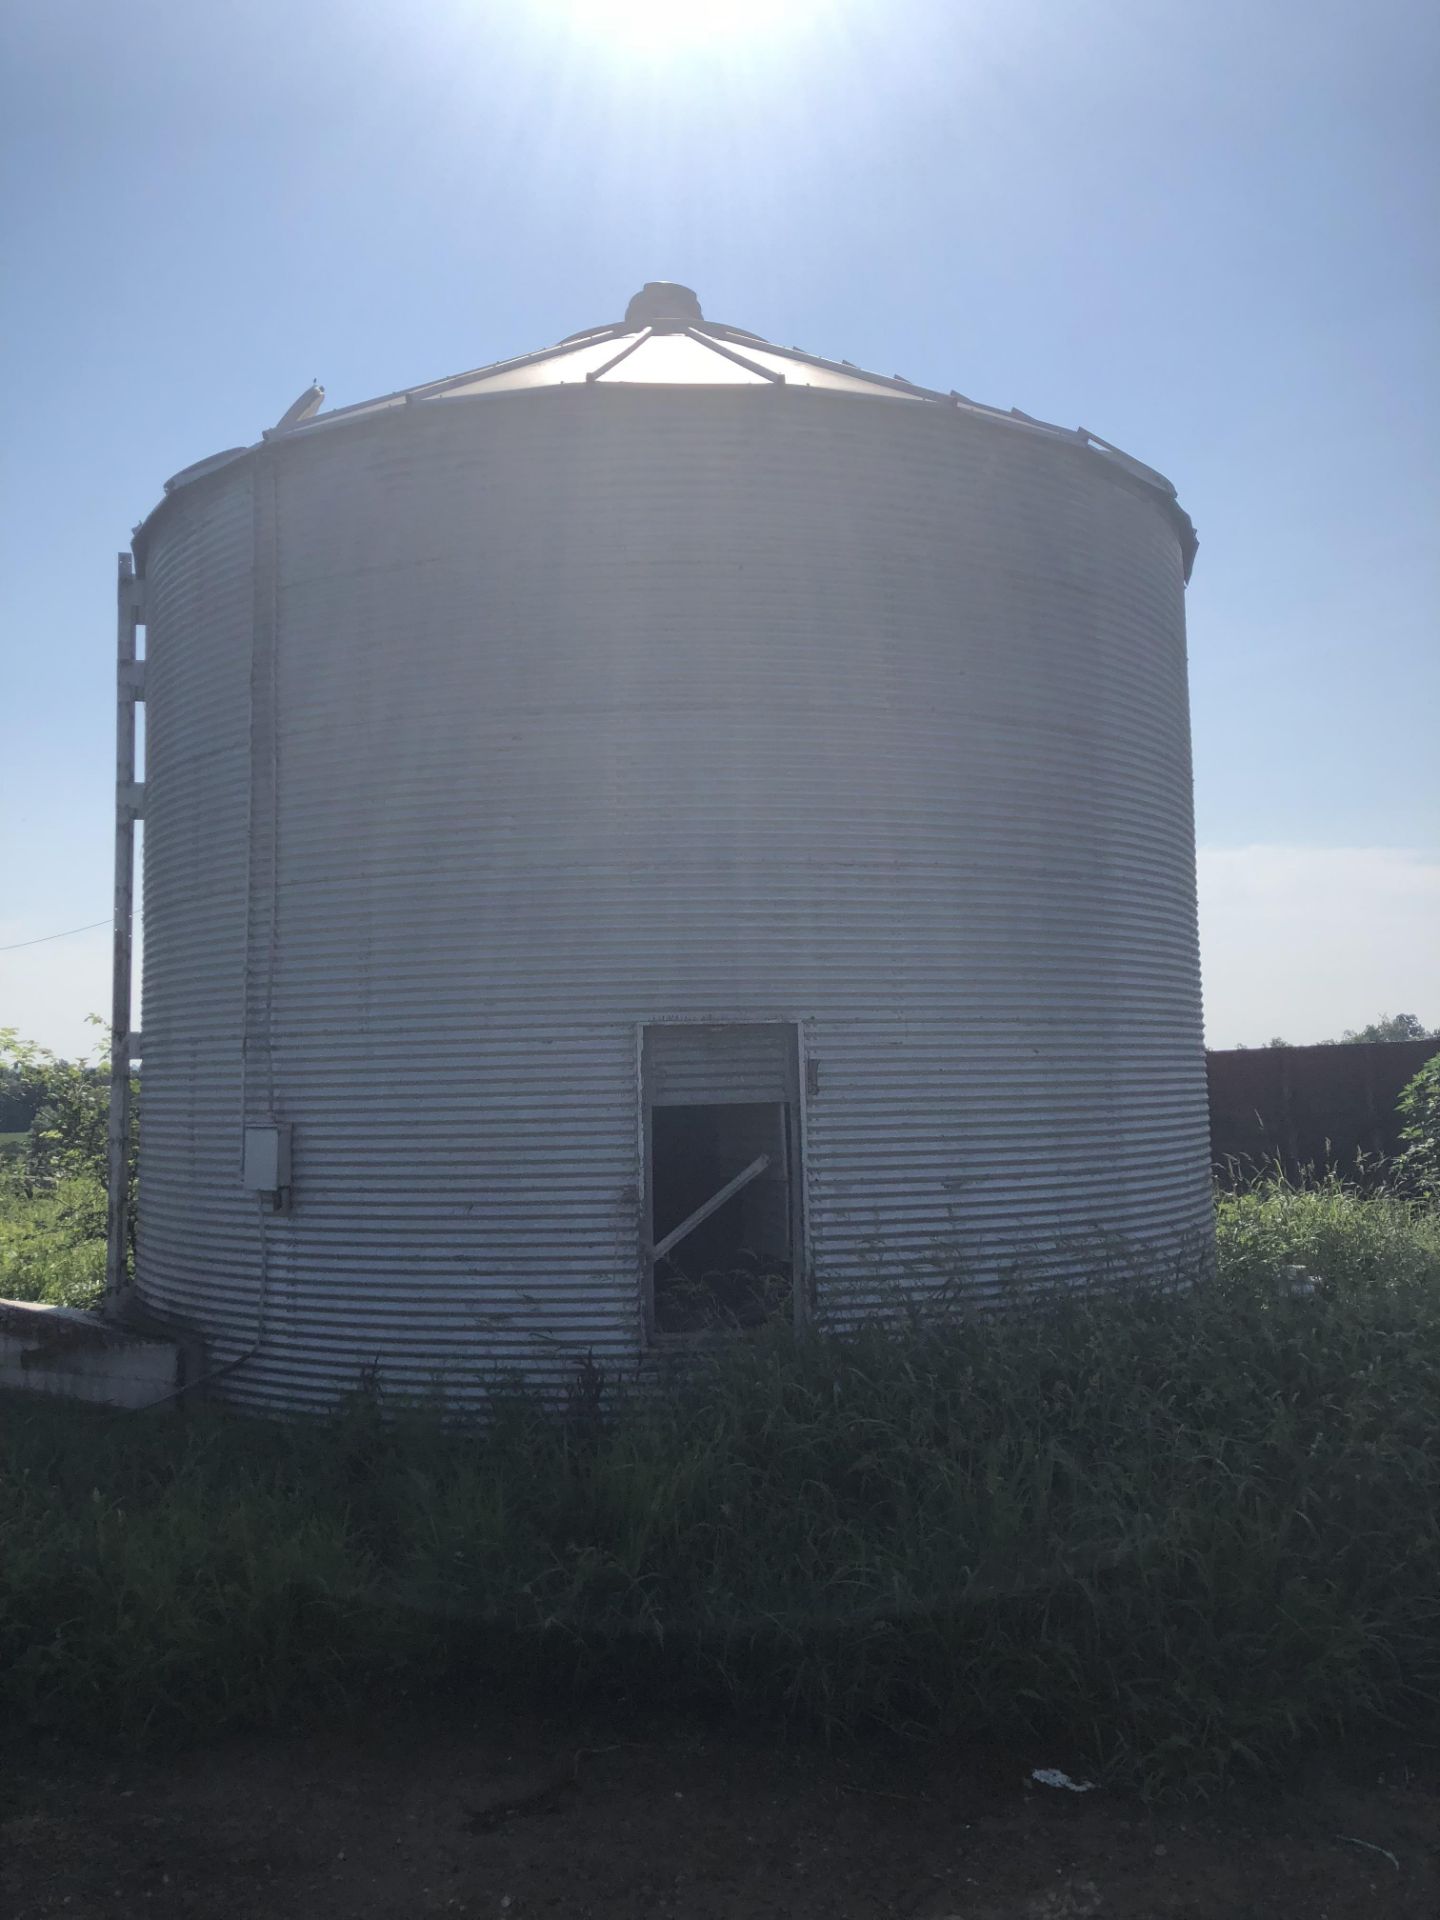 24'x6 ring Grain Bin, has to be dismantled and removed within 60 days of auction, 6" unload,